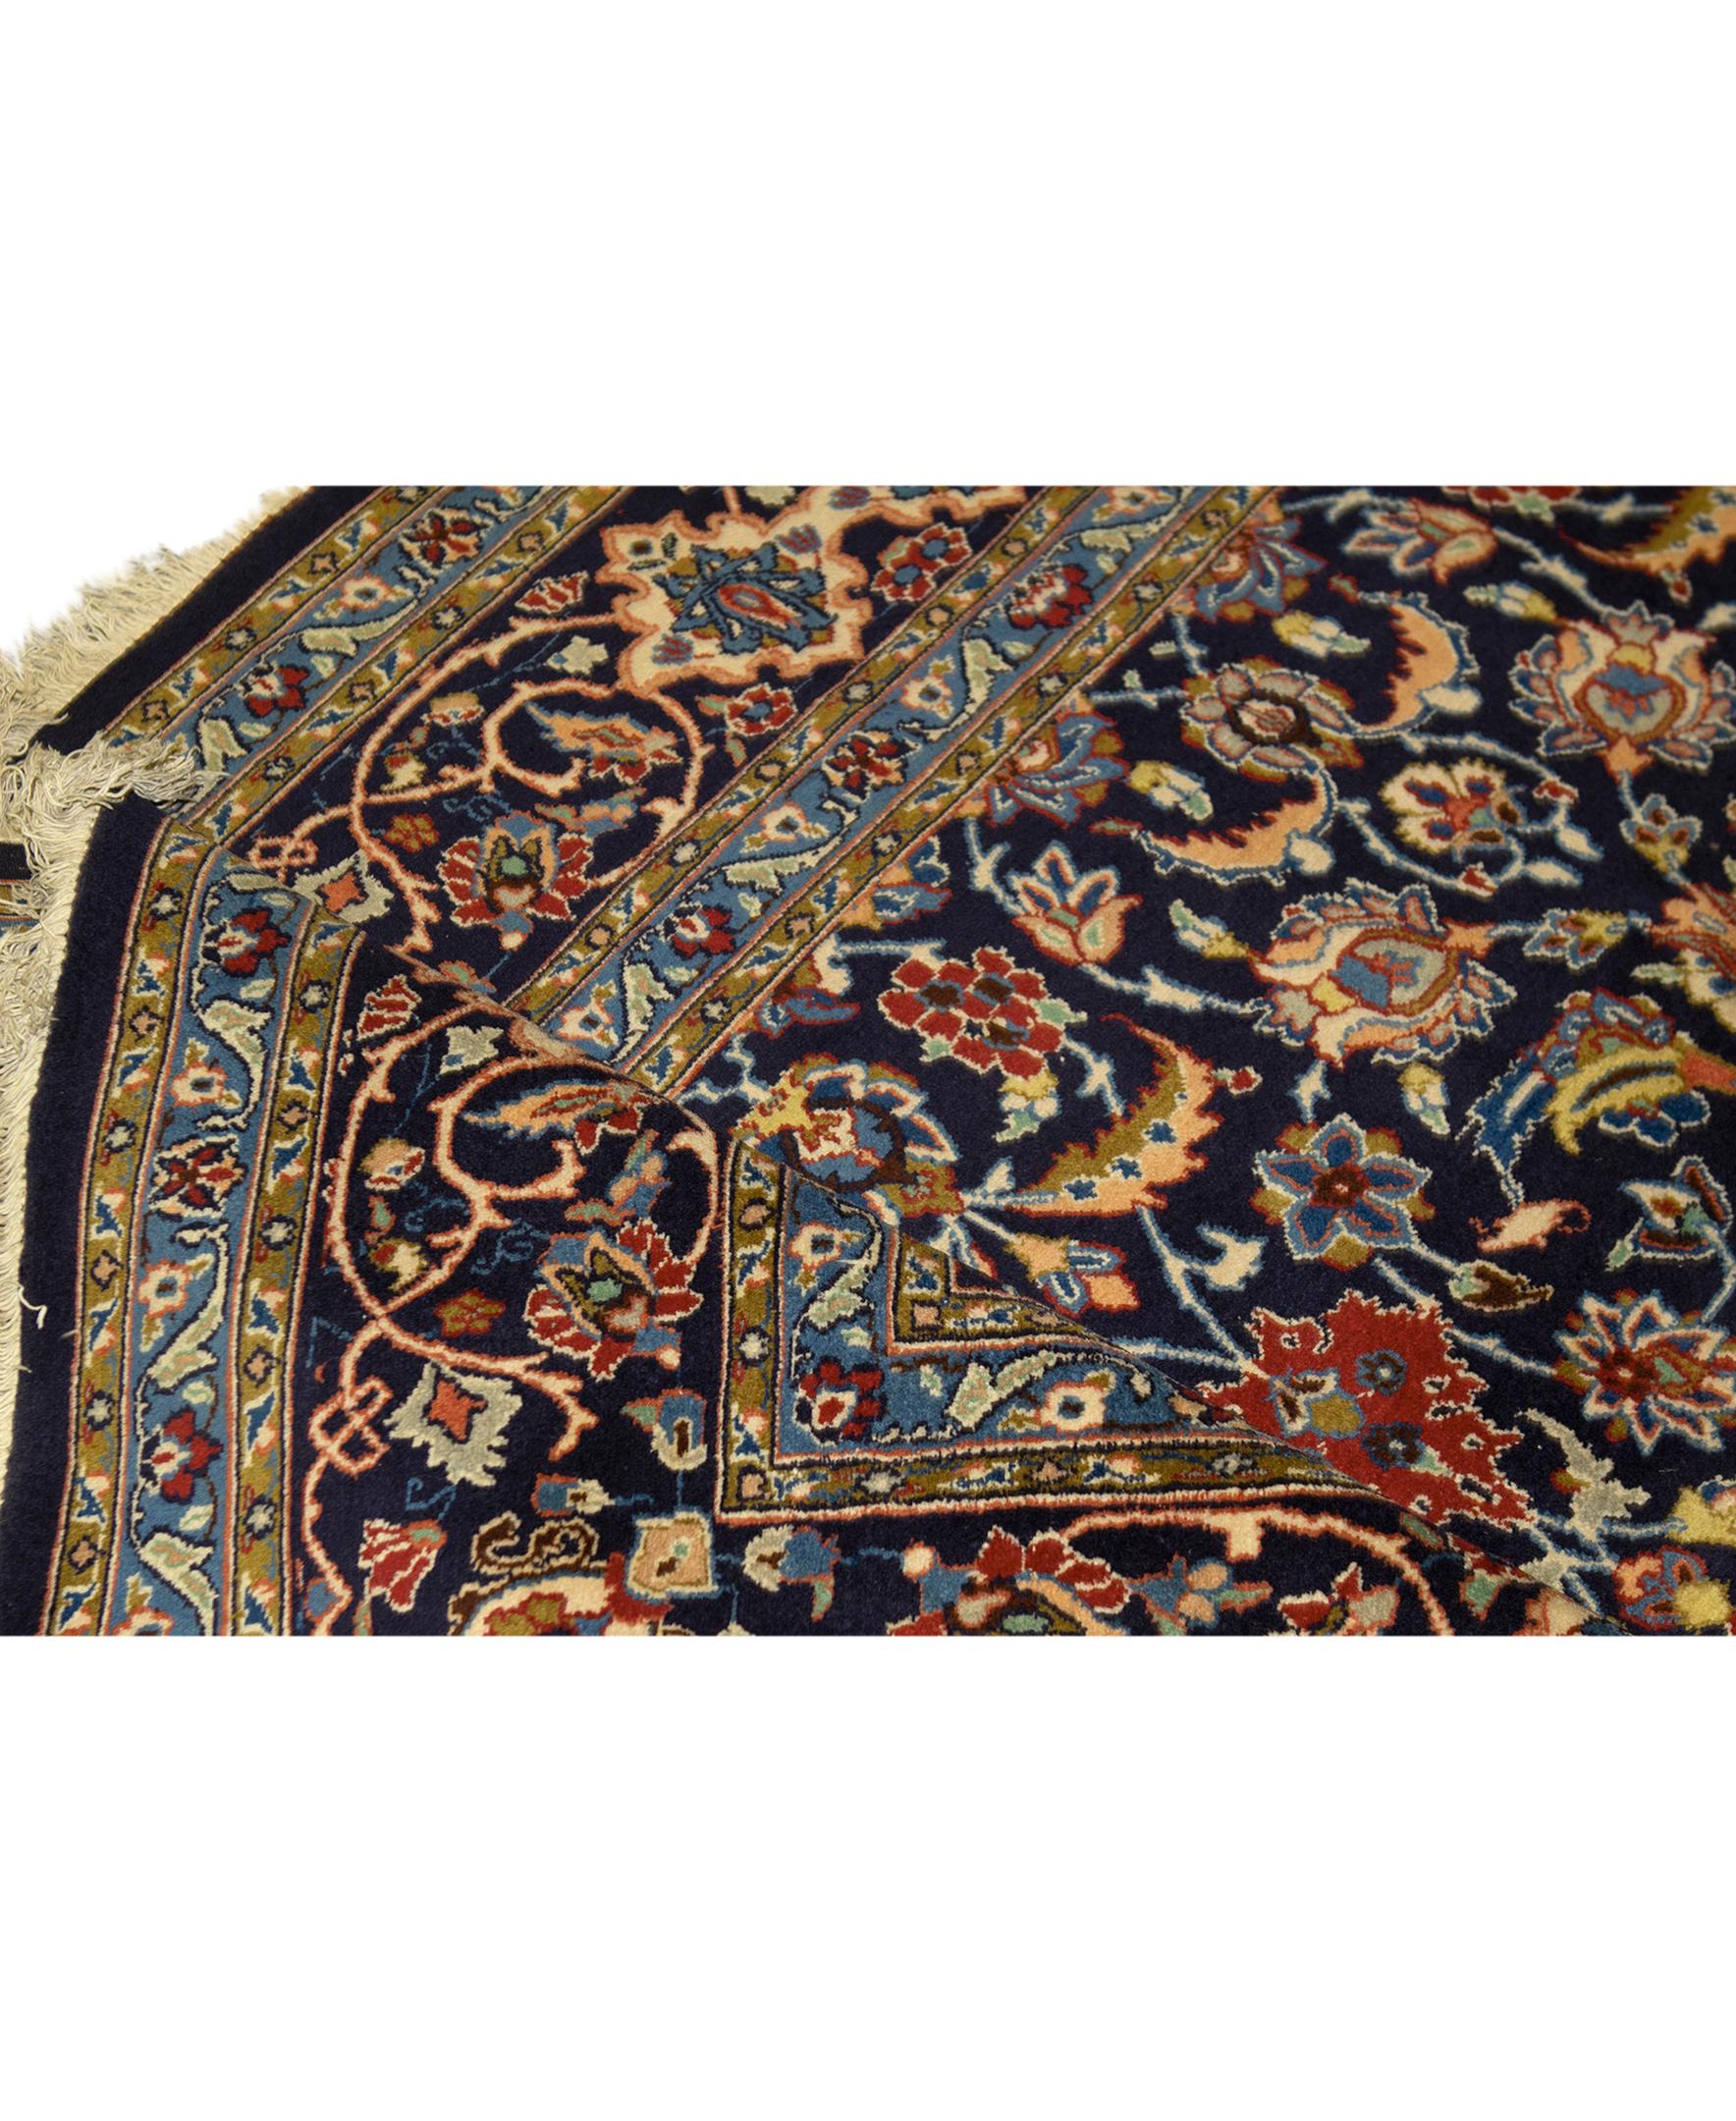  Antique Persian fine Traditional Handwoven Luxury Wool Navy Rug. Size: 6'-7